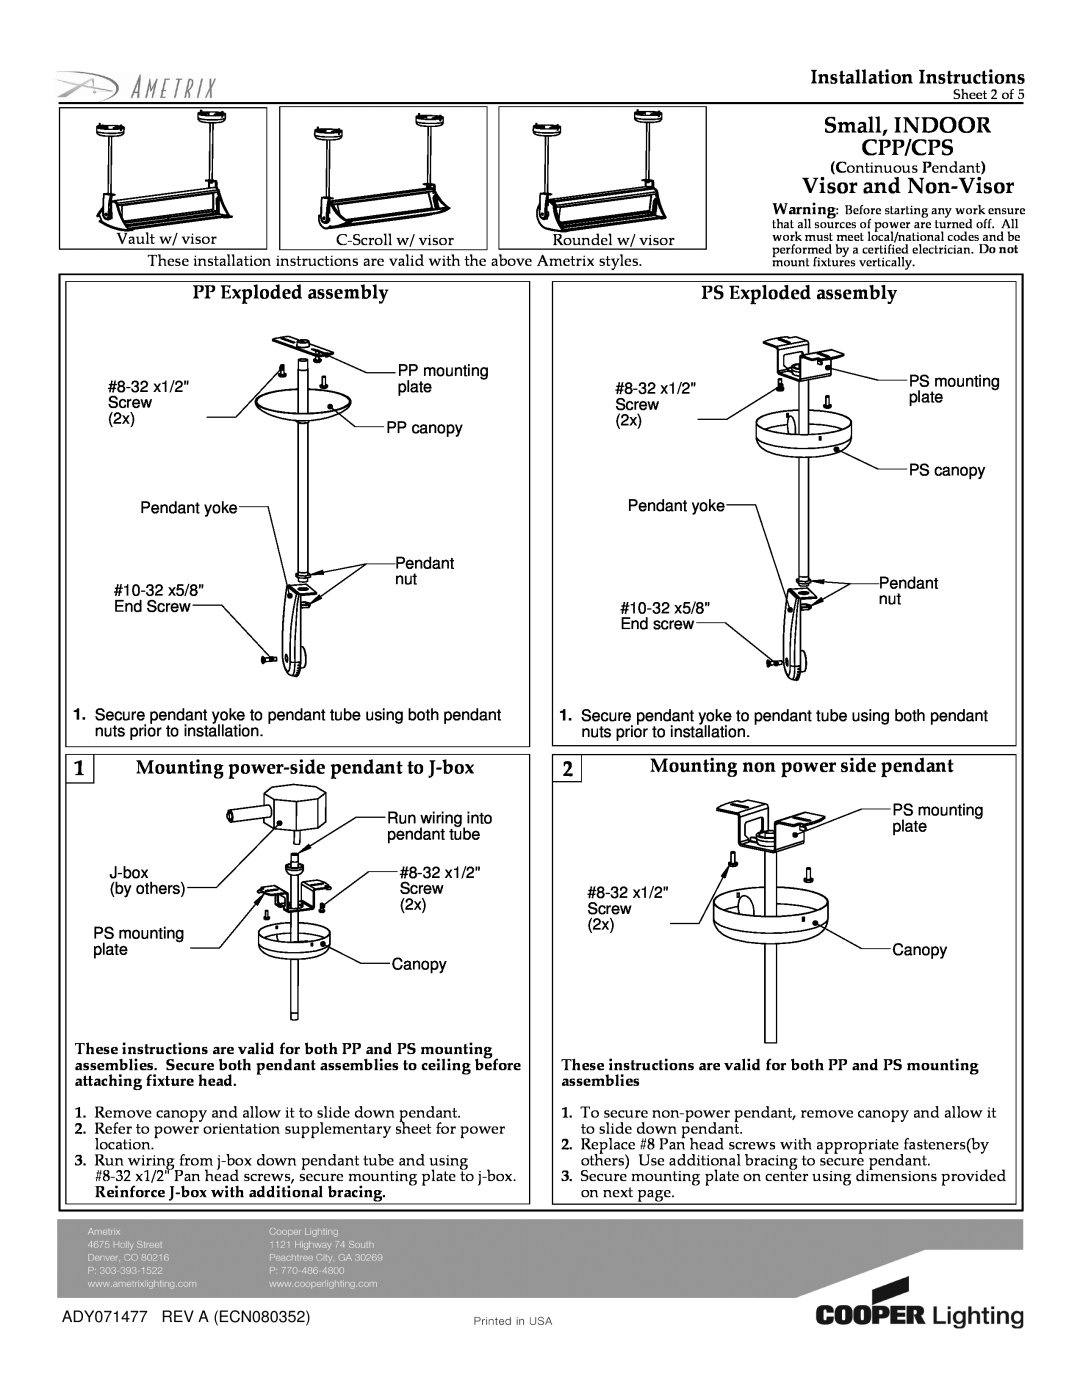 Cooper Lighting CPP/CPS PP Exploded assembly, PS Exploded assembly, 1Mounting power-sidependant to J-box 